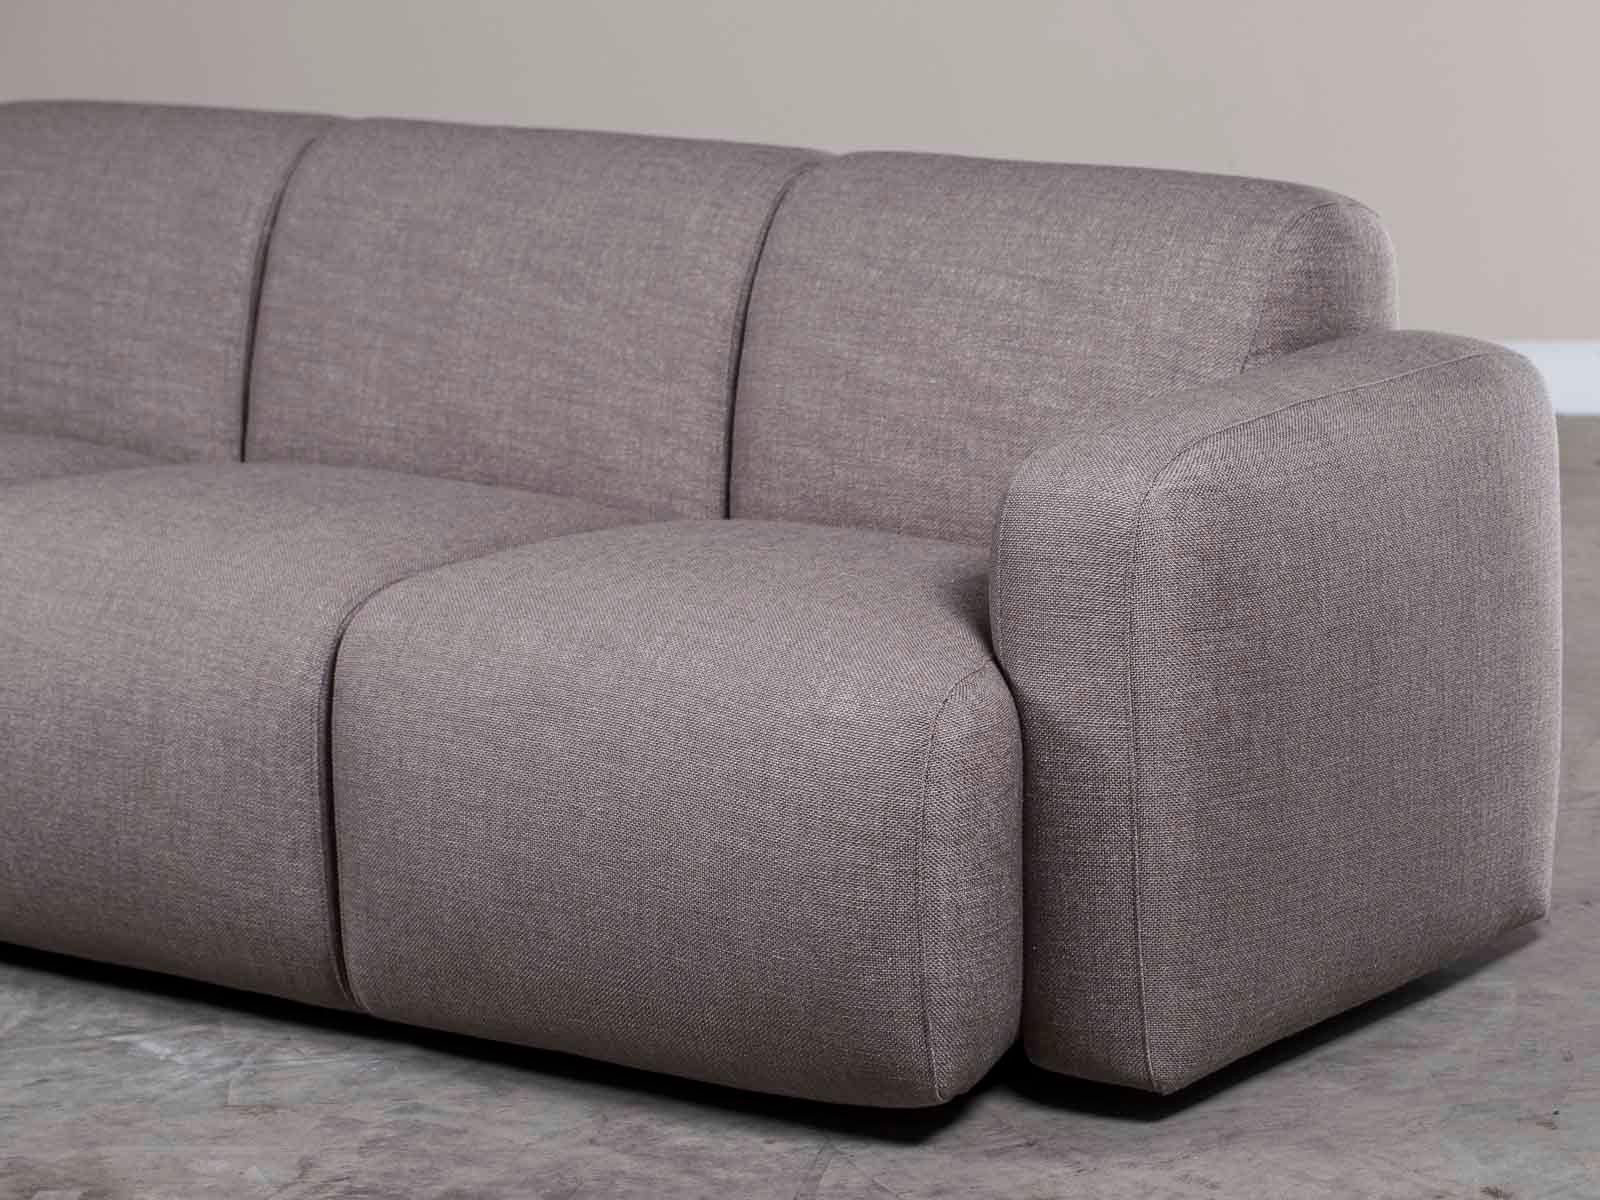 Woven Modern Grey Linen Three-Seat Sofa with Contemporary Rounded Lines Finished Back